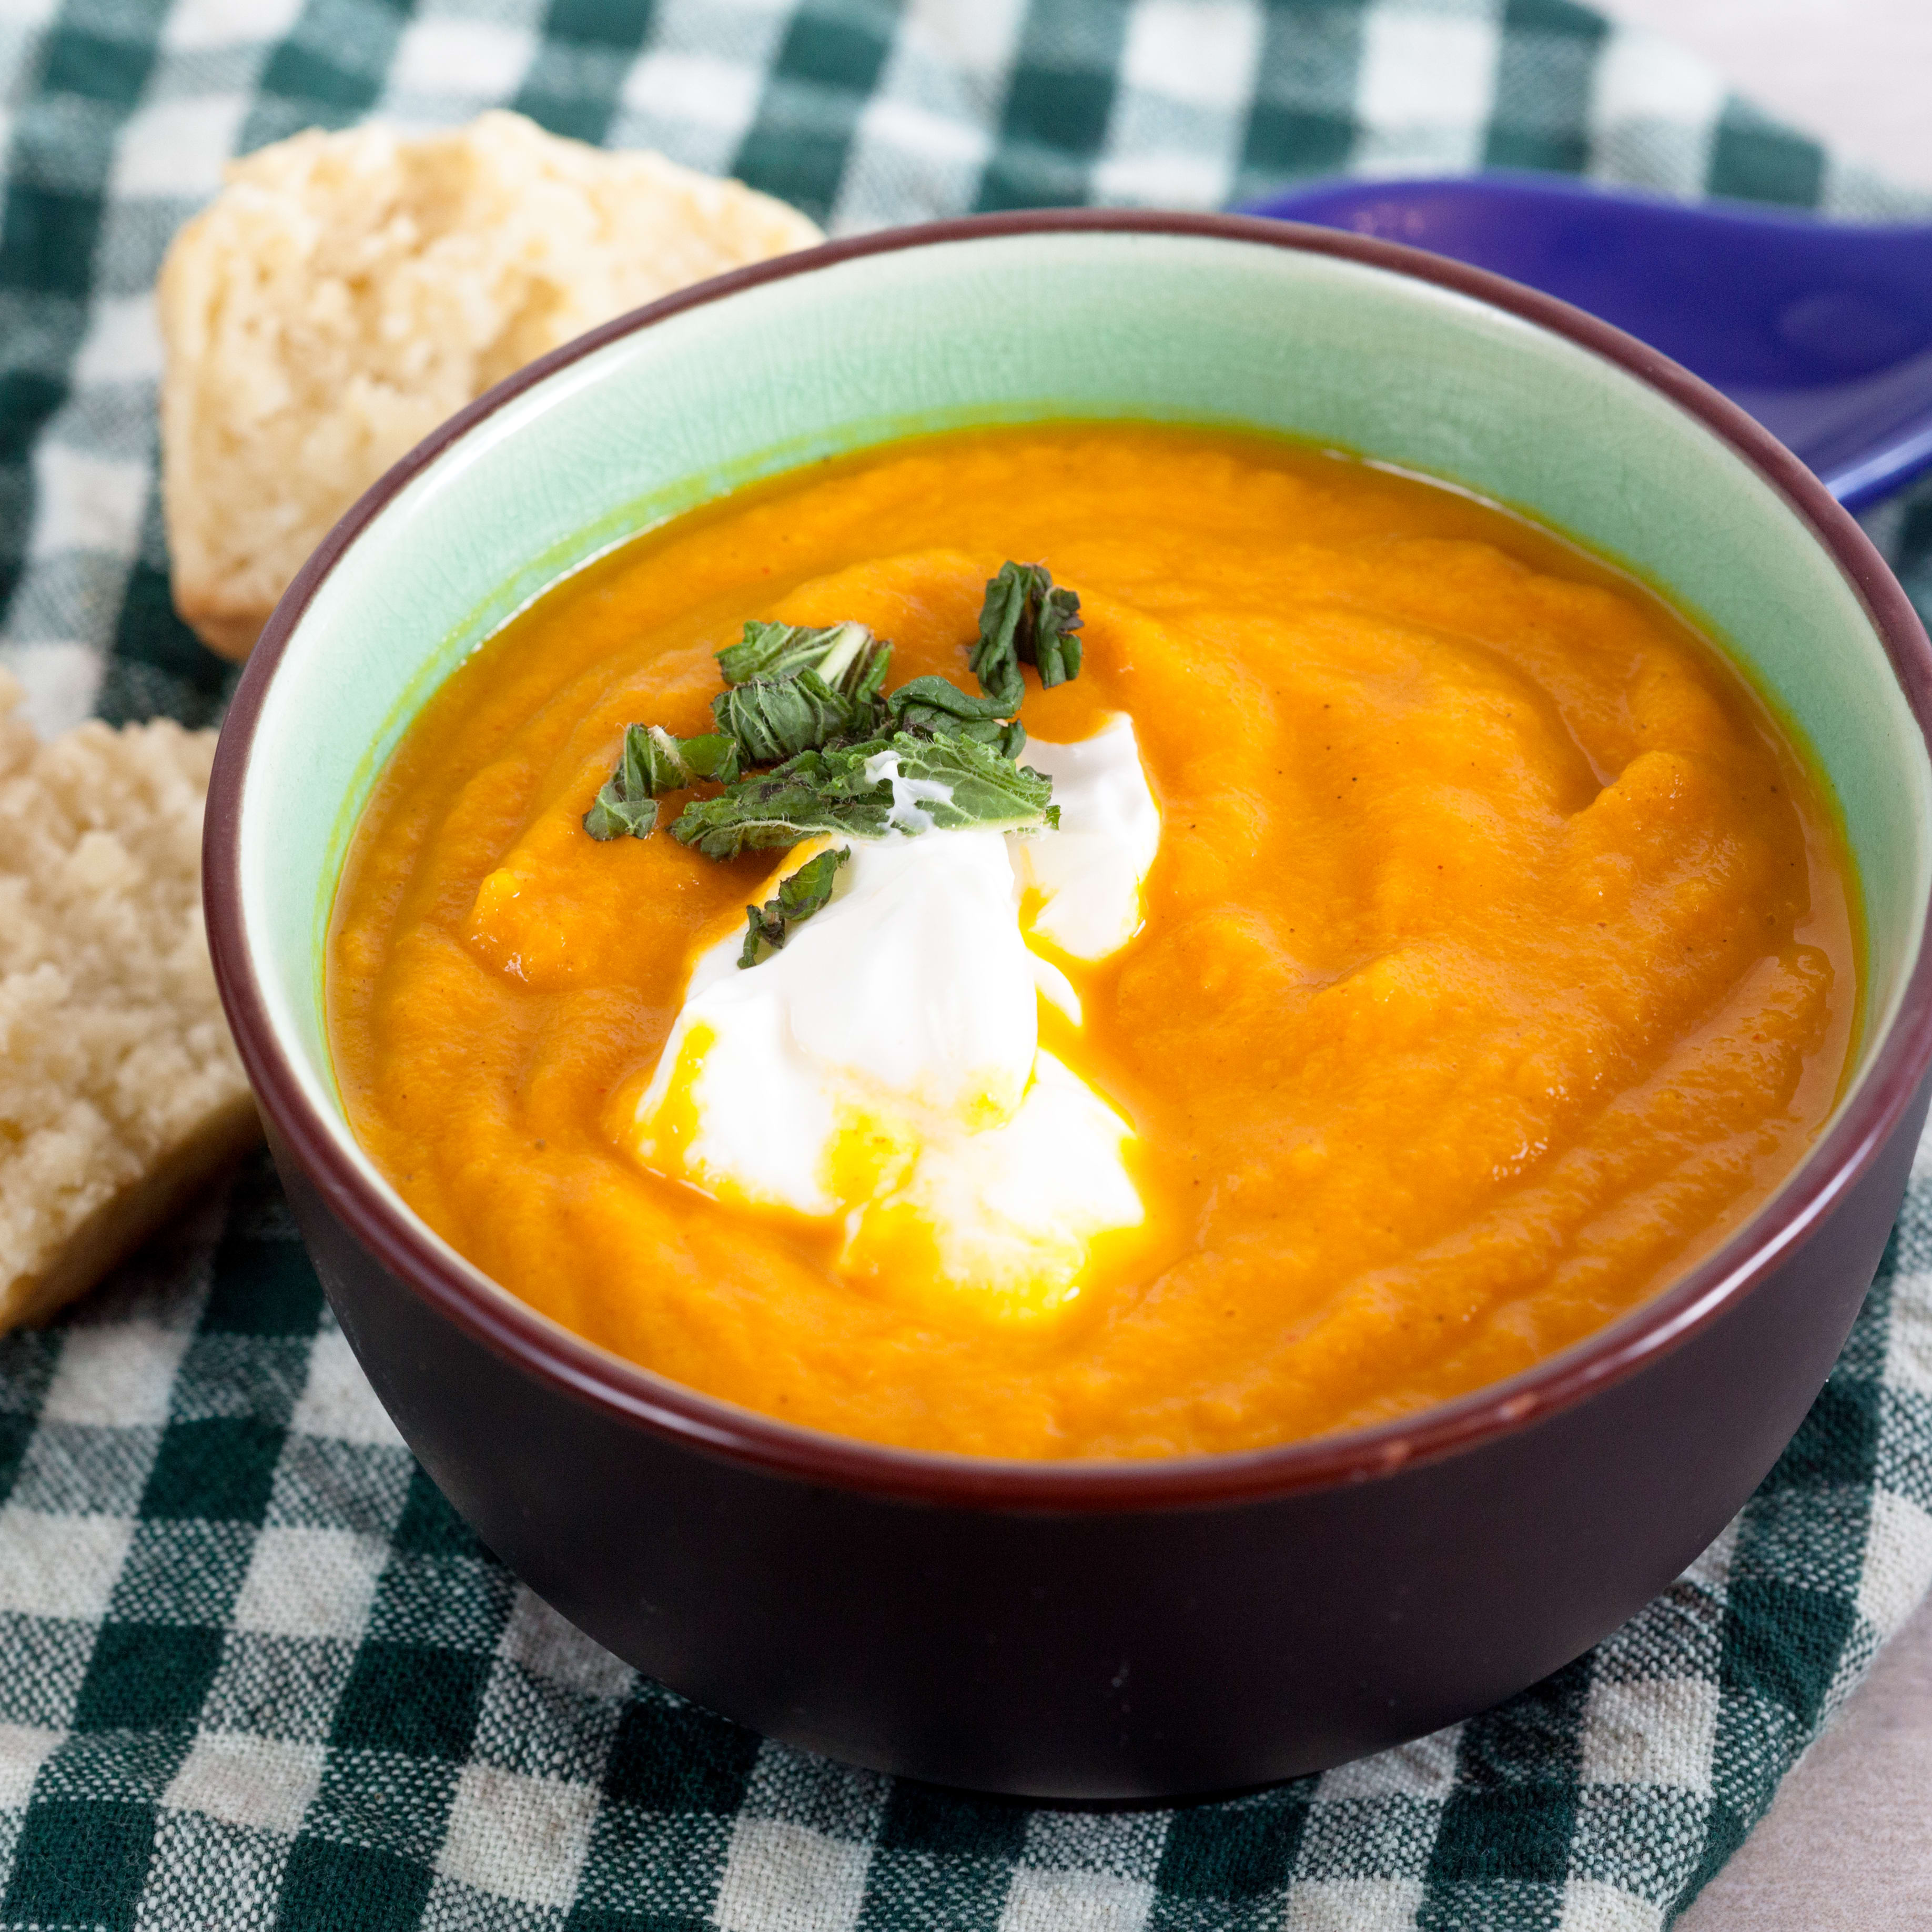 https://food-fanatic-res.cloudinary.com/iu/s--Ct-DExoT--/c_thumb,f_auto,g_auto,h_3673,q_auto,w_3673/v1428176339/roasted-carrot-ginger-soup-photo